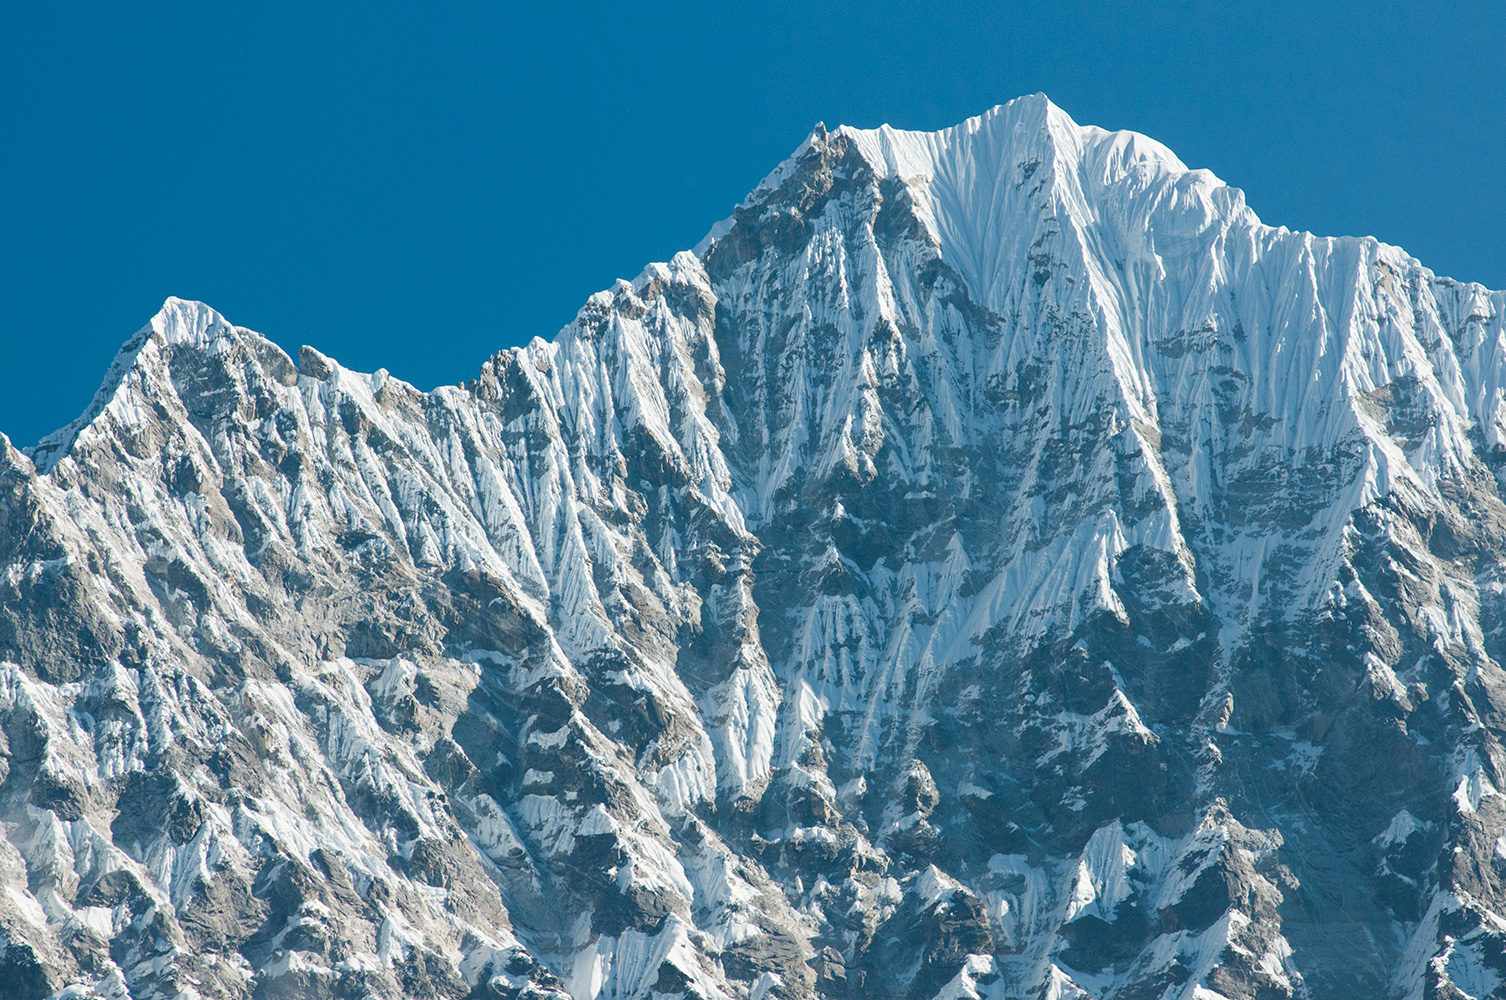 The first close-up view of a Himalayan giant on the walk in to Everest is of Thamserku, through the jungle from the trail near the village of Monjo.Nikon D300, 180mm. November 2008